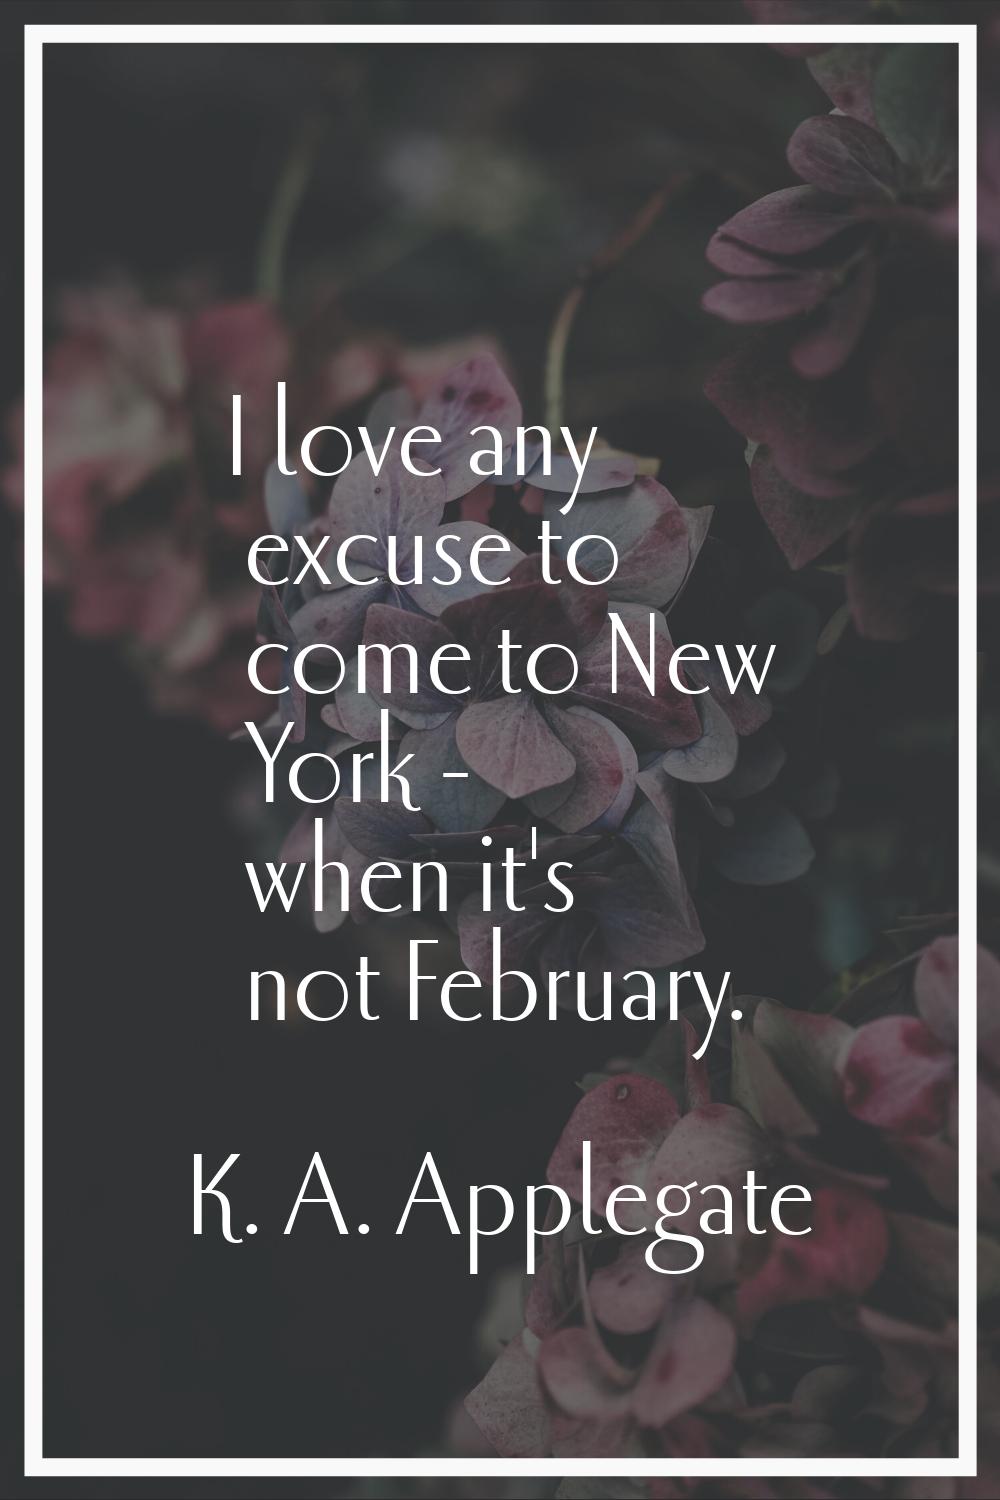 I love any excuse to come to New York - when it's not February.